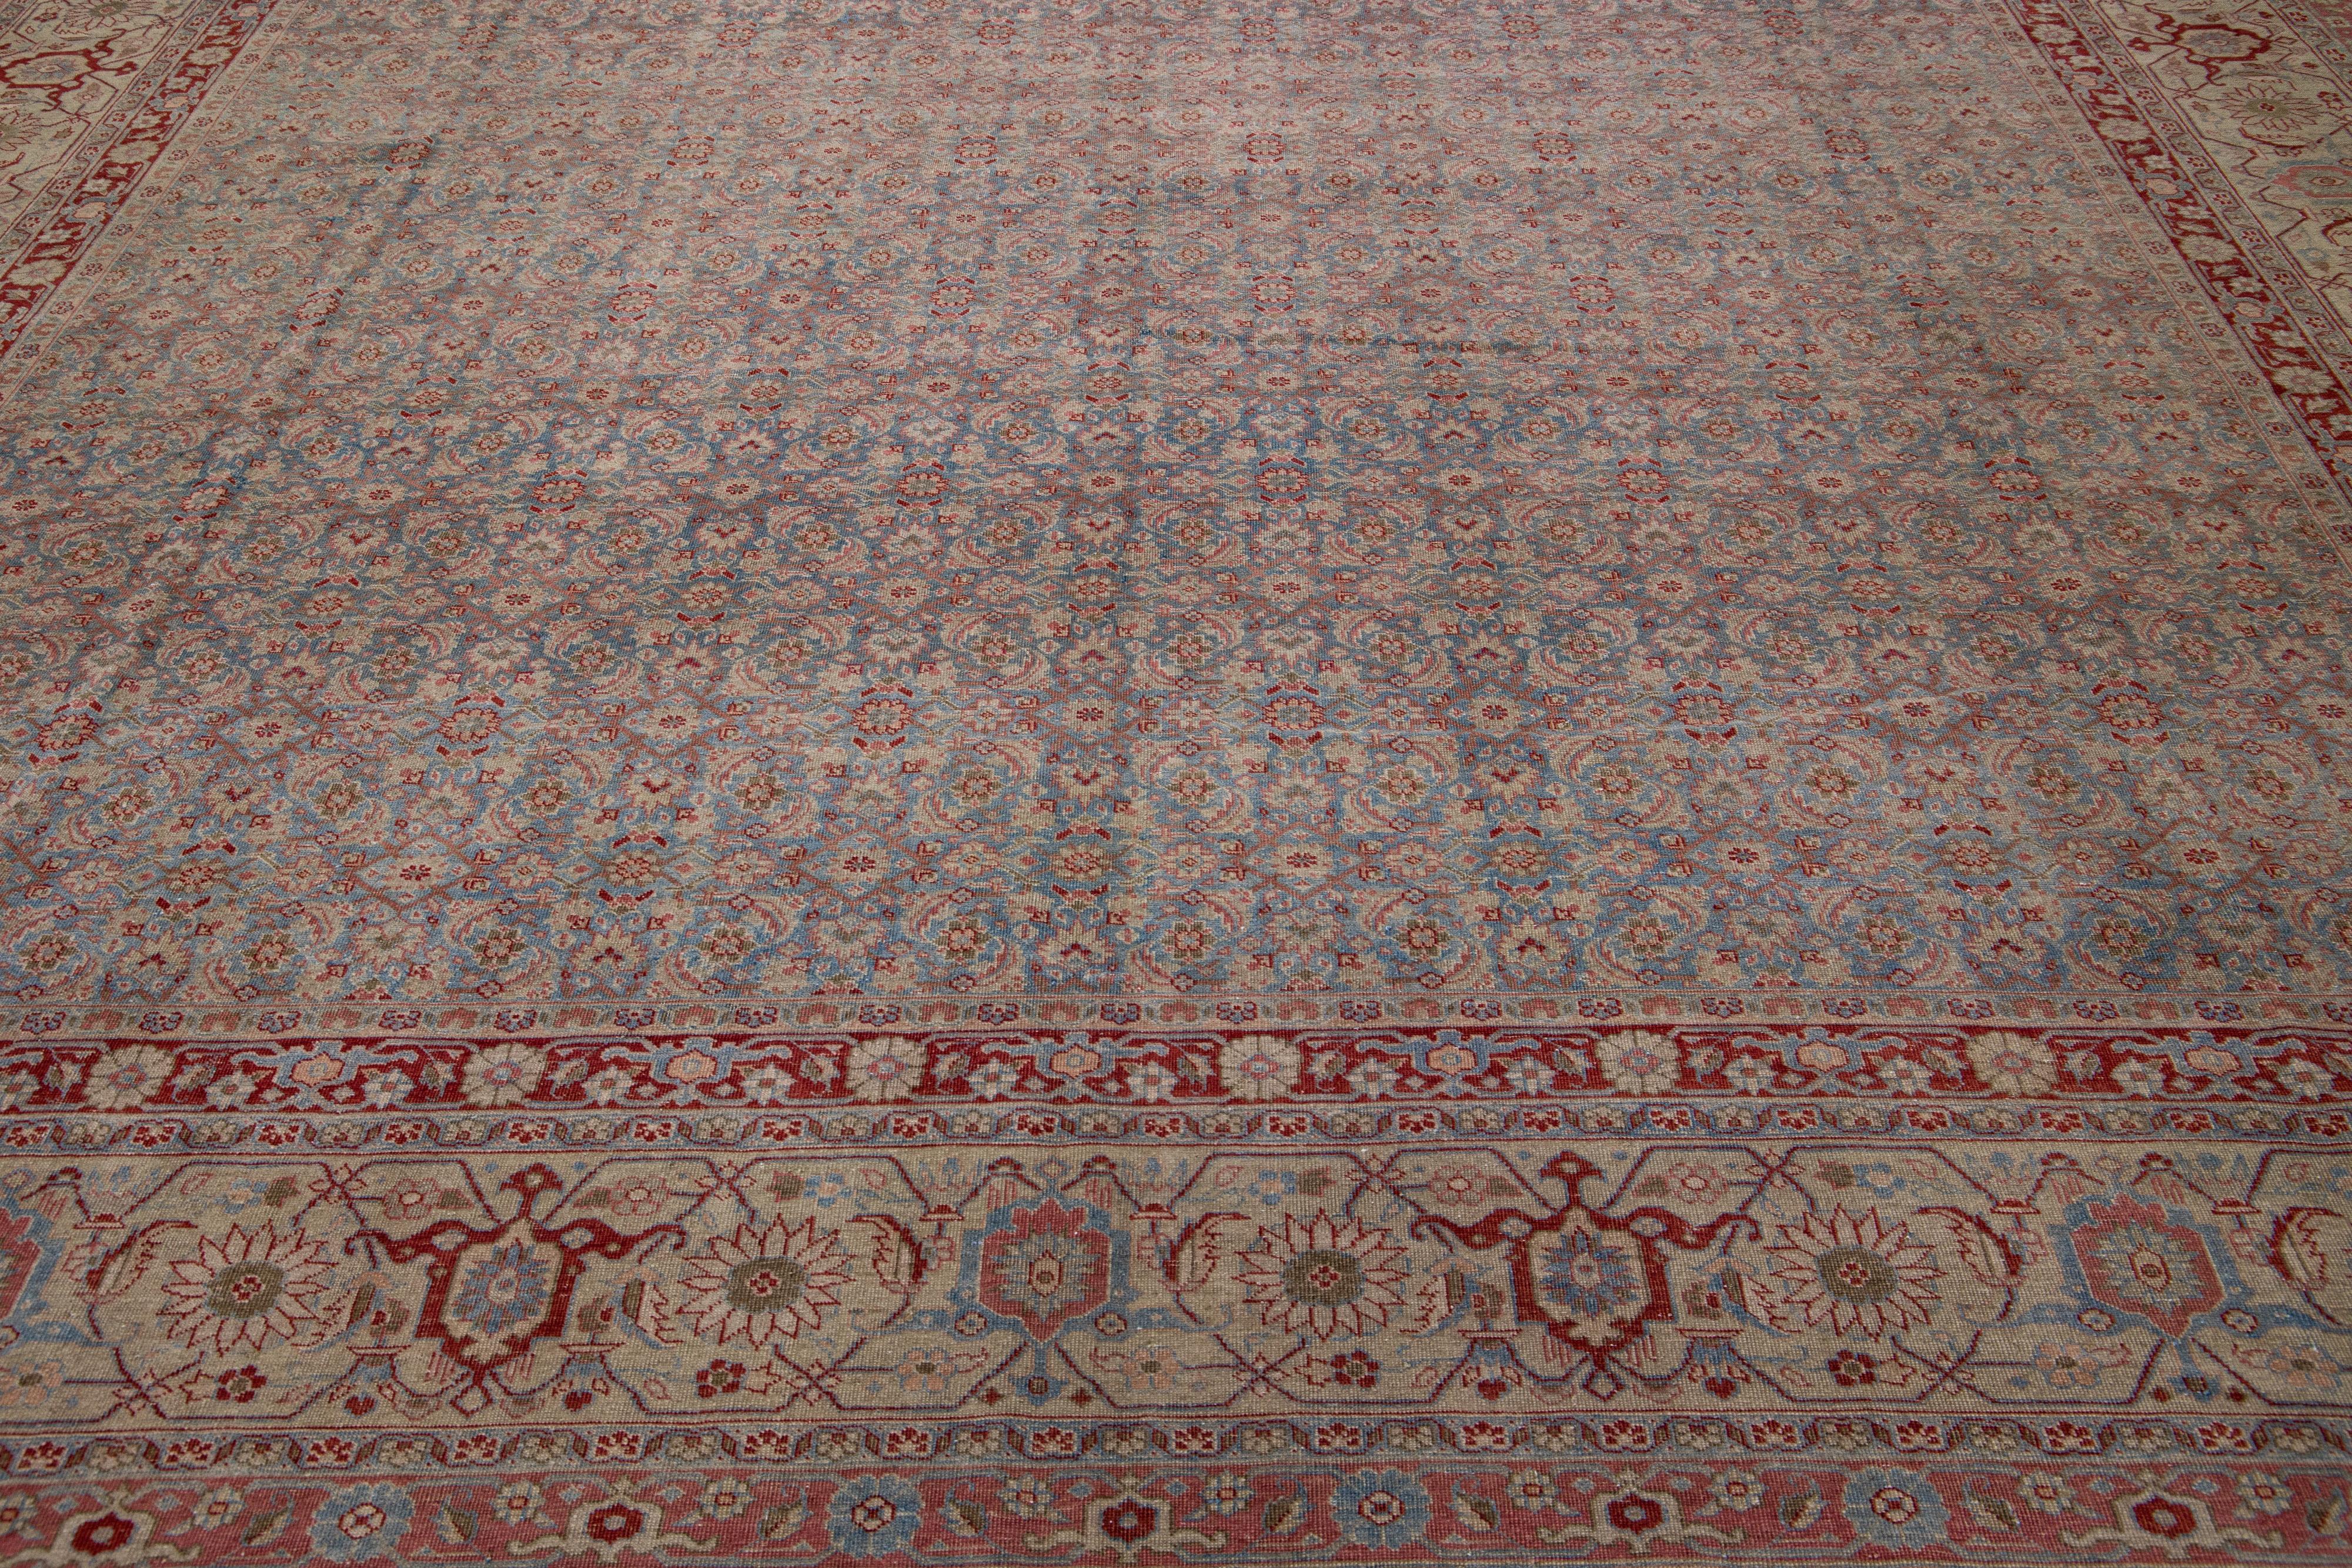 This antique Tabriz rug boasts a blue field and features exquisite, hand-knotted wool construction complemented by hints of red and beige in an all-over floral pattern. This unique craftsmanship is durable and timeless so it can be enjoyed for